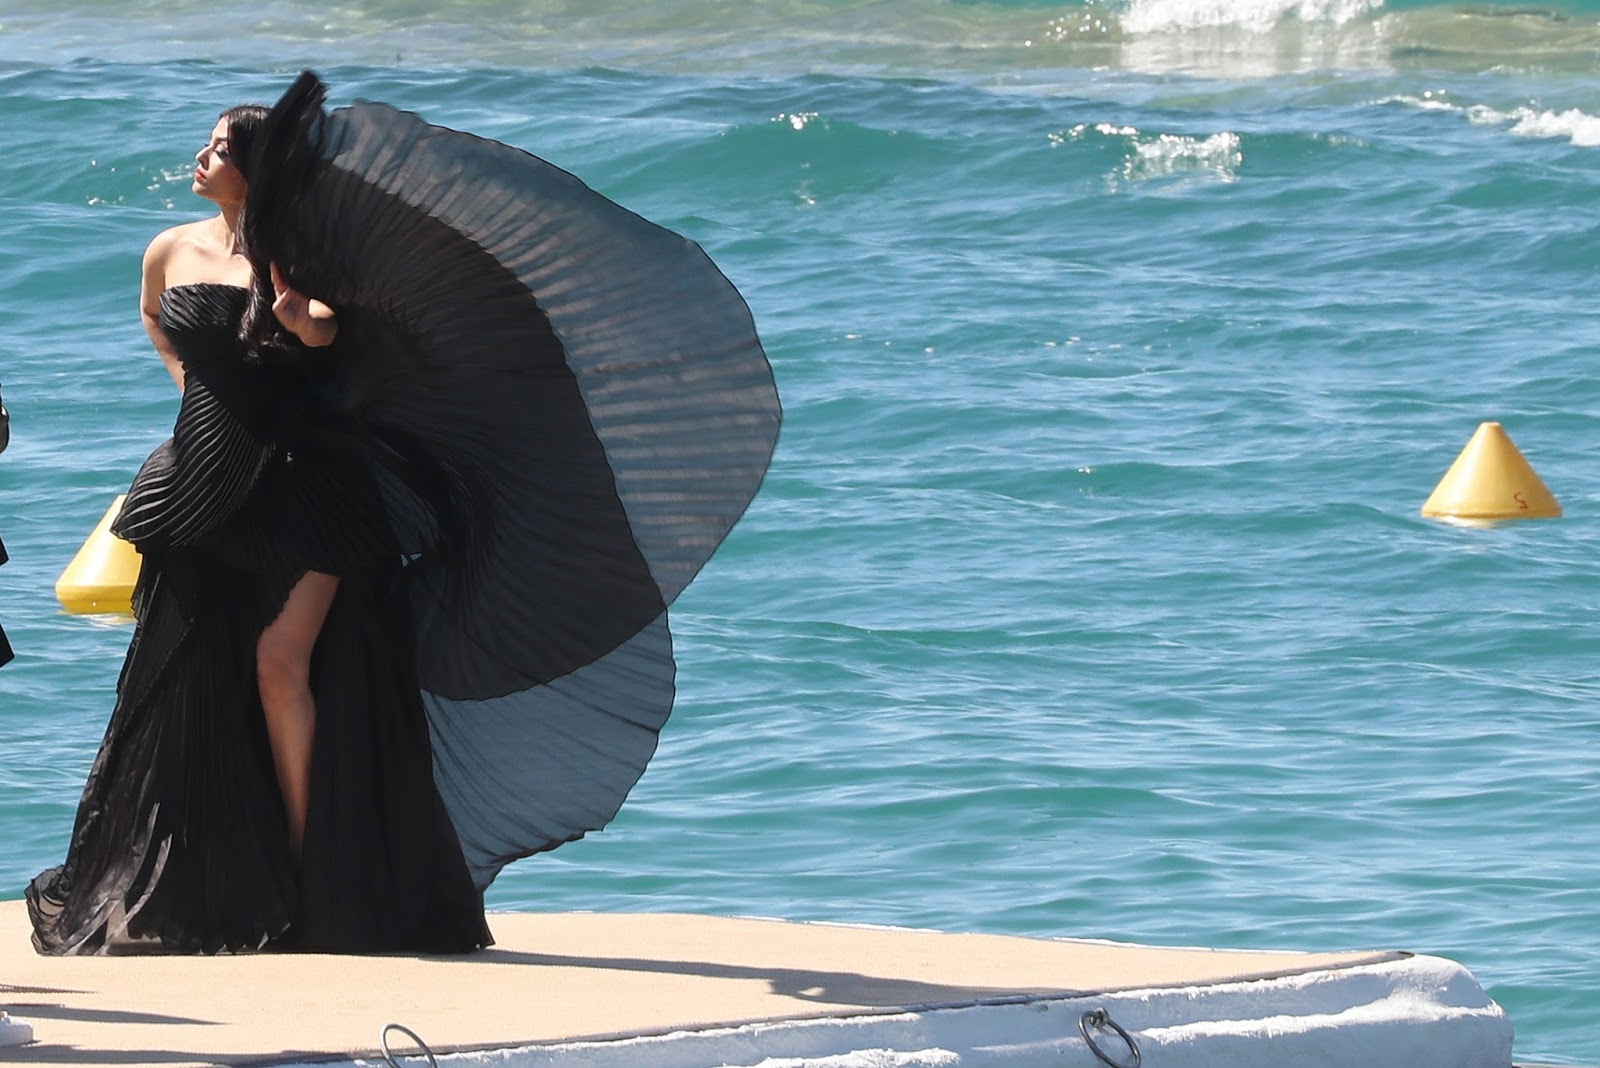 Aishwarya Rai Looks Irresistibly Sexy in Black Dress During a Photoshoot At Martinez Beach During The 70th Cannes Film Festival 2017